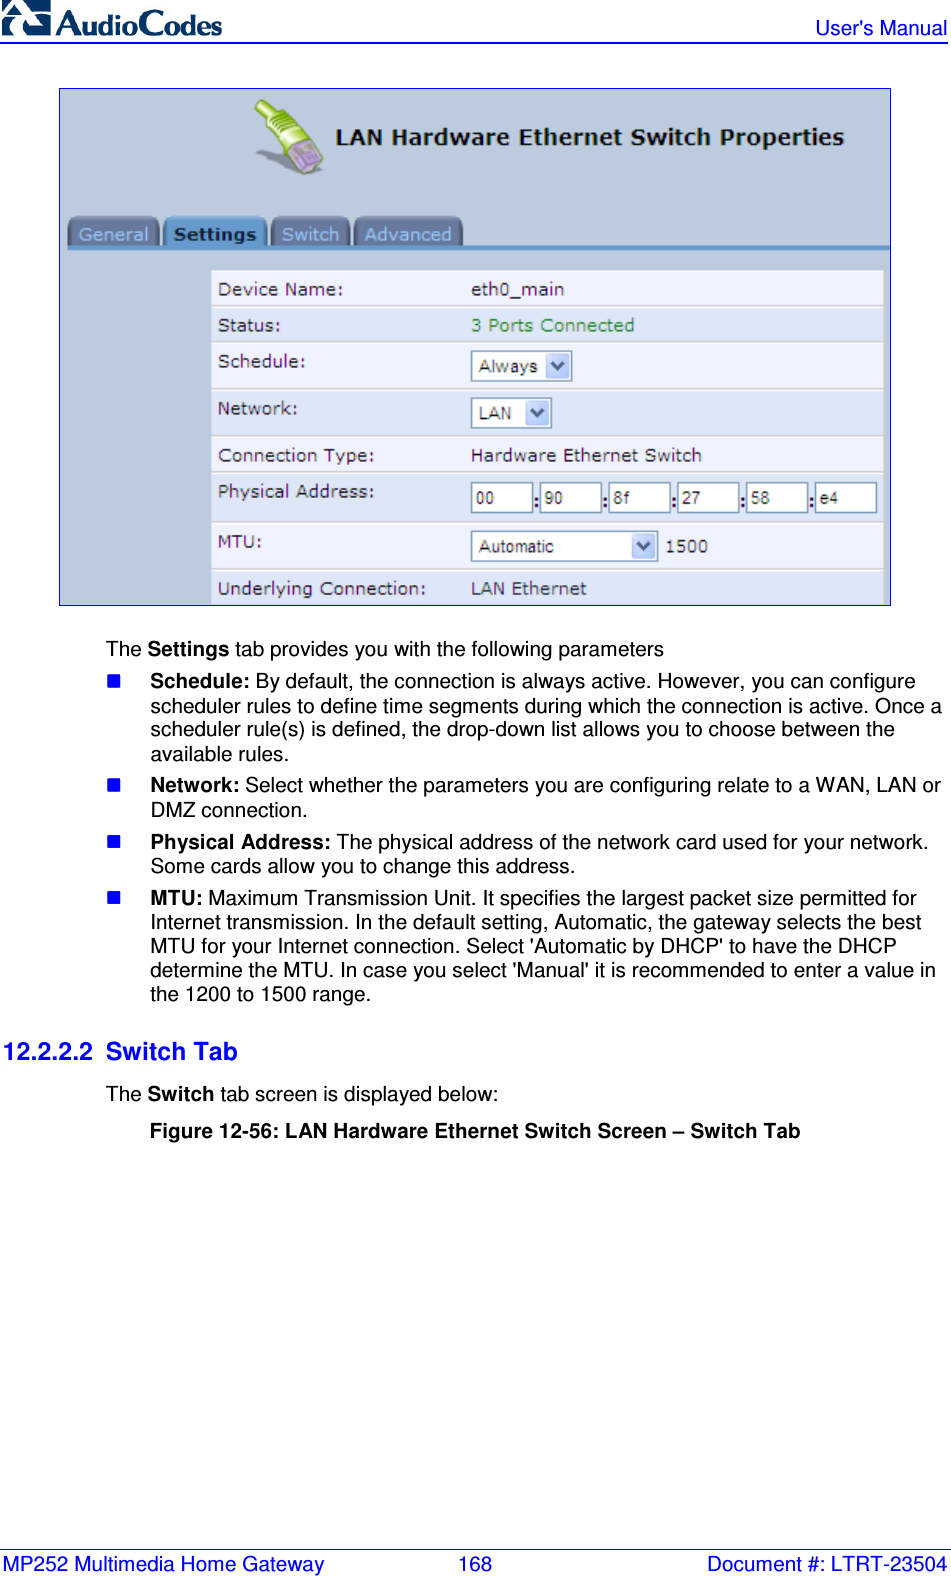 MP252 Multimedia Home Gateway  168  Document #: LTRT-23504   User&apos;s Manual   The Settings tab provides you with the following parameters  Schedule: By default, the connection is always active. However, you can configure scheduler rules to define time segments during which the connection is active. Once a scheduler rule(s) is defined, the drop-down list allows you to choose between the available rules.  Network: Select whether the parameters you are configuring relate to a WAN, LAN or DMZ connection.   Physical Address: The physical address of the network card used for your network. Some cards allow you to change this address.  MTU: Maximum Transmission Unit. It specifies the largest packet size permitted for Internet transmission. In the default setting, Automatic, the gateway selects the best MTU for your Internet connection. Select &apos;Automatic by DHCP&apos; to have the DHCP determine the MTU. In case you select &apos;Manual&apos; it is recommended to enter a value in the 1200 to 1500 range. 12.2.2.2  Switch Tab The Switch tab screen is displayed below: Figure 12-56: LAN Hardware Ethernet Switch Screen – Switch Tab 